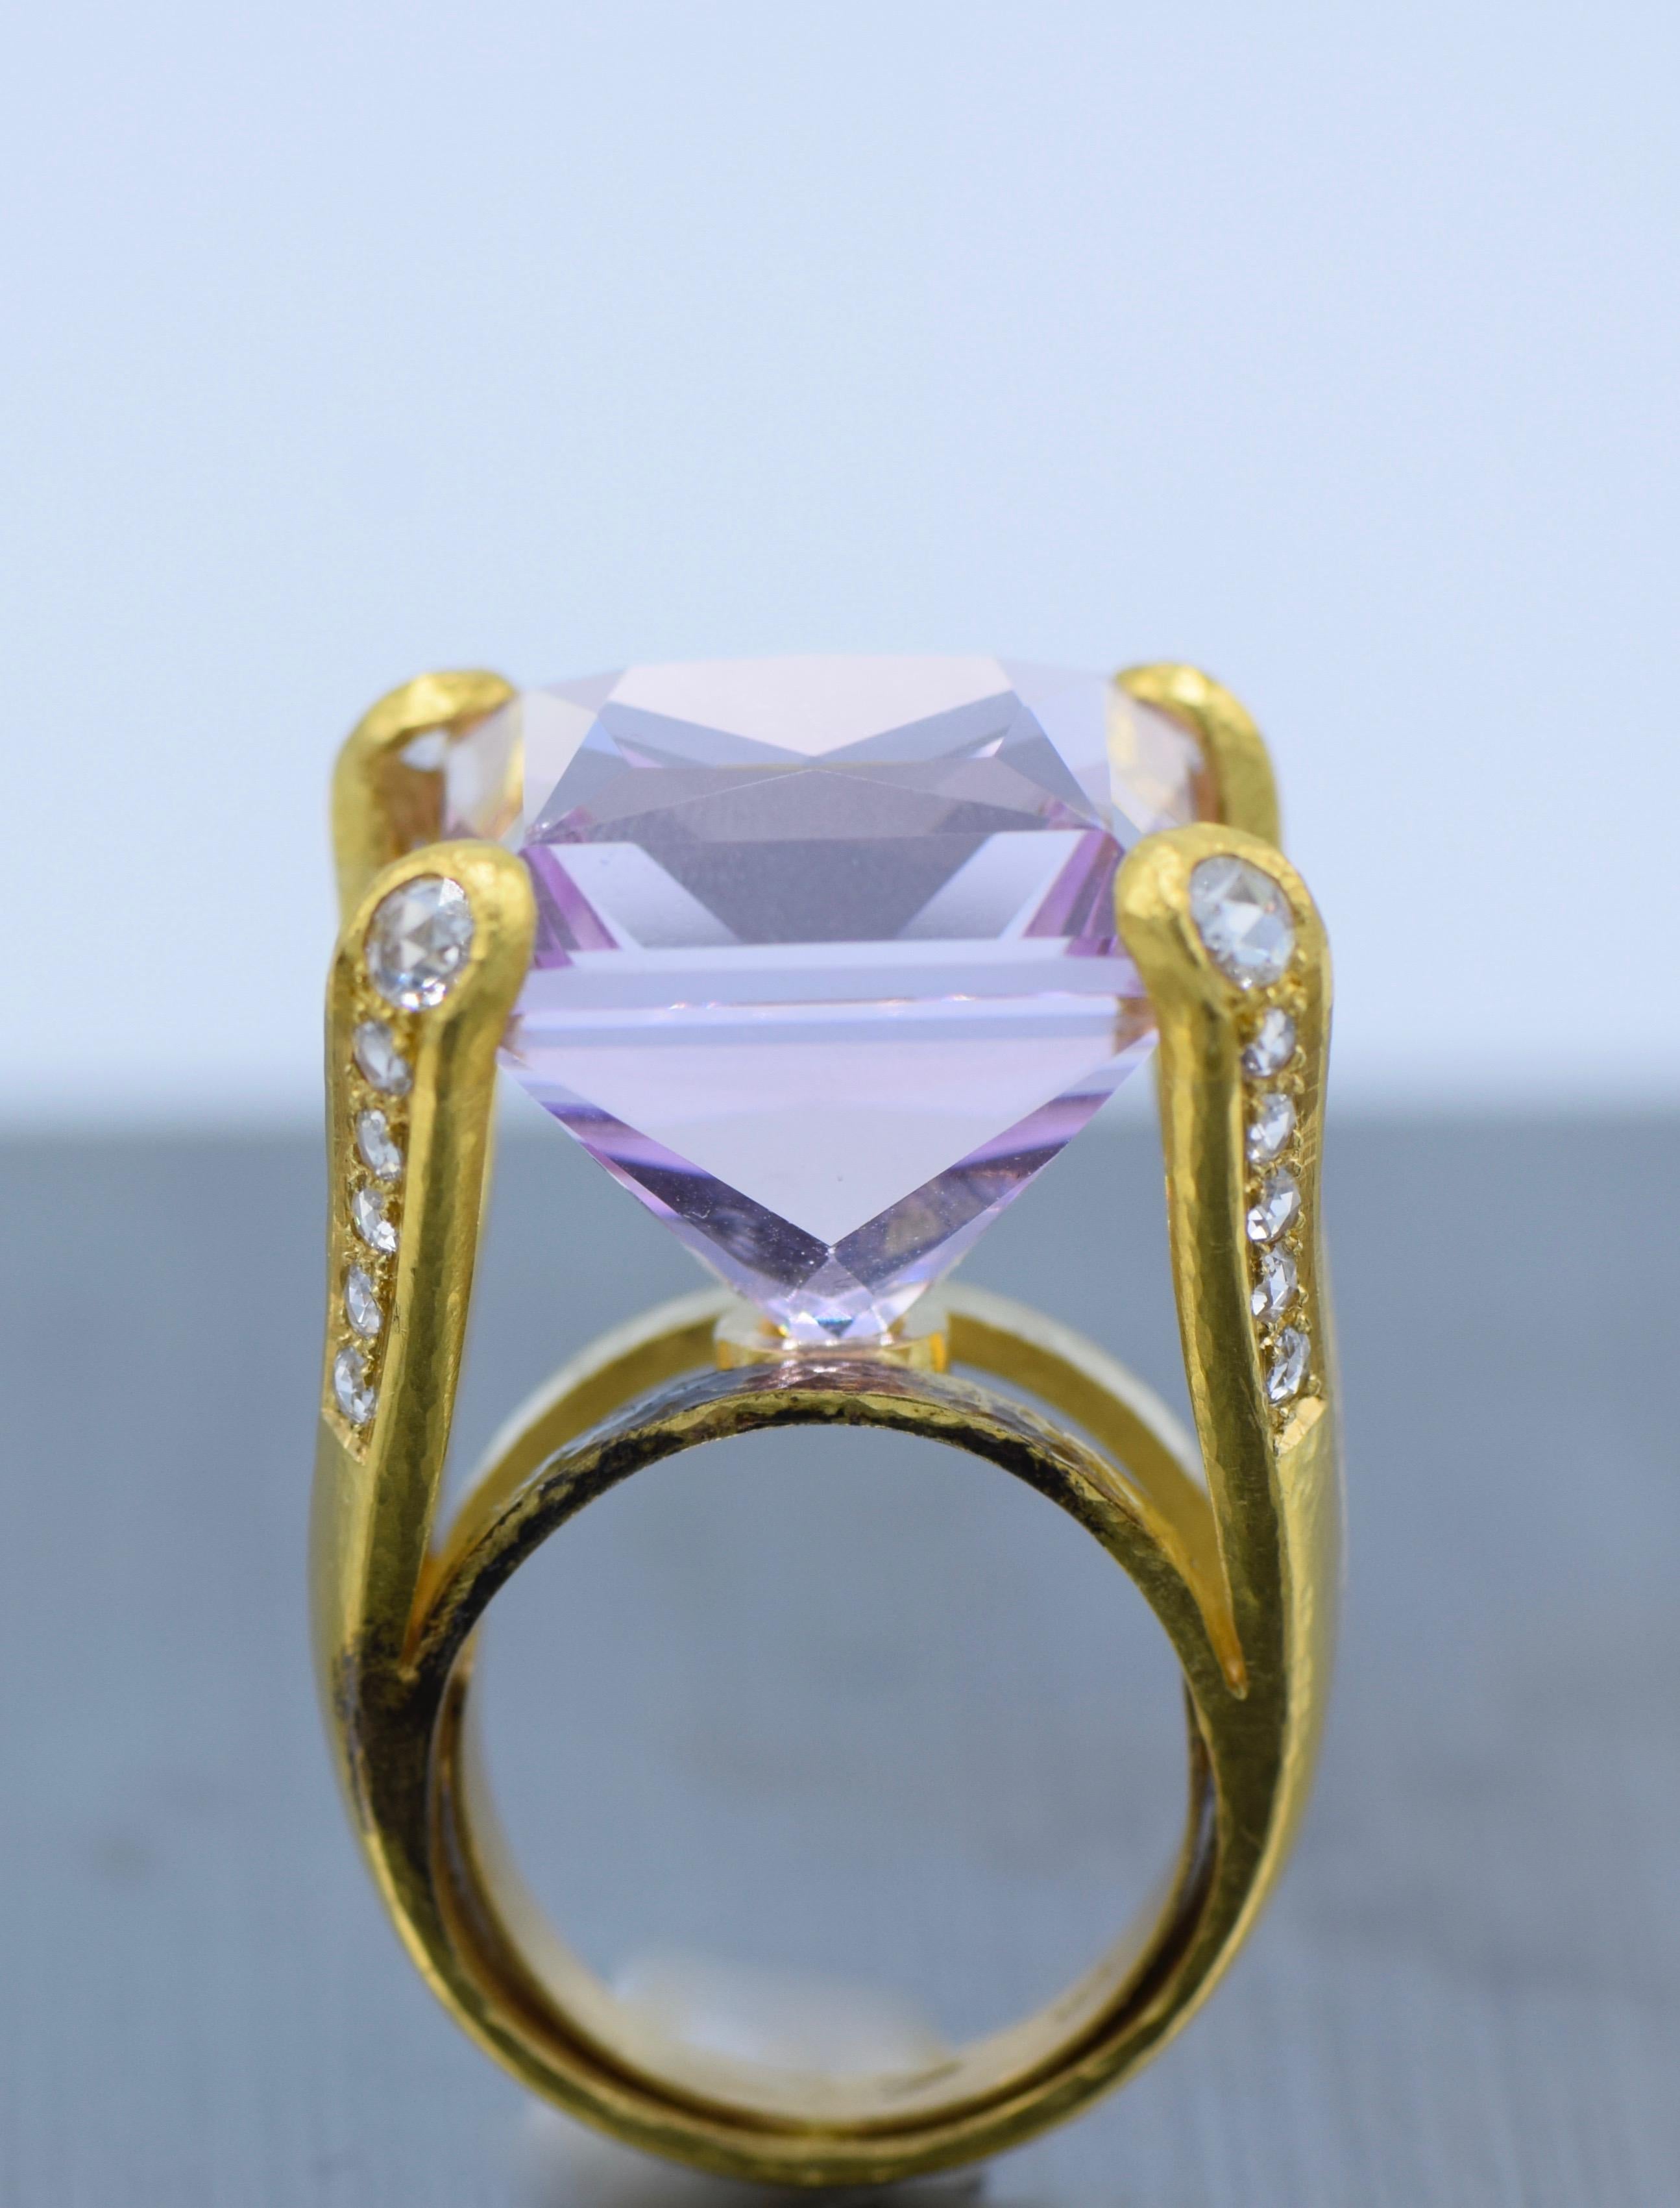 Elizabeth Locke, Very beautiful Kunzite and Diamond Ring, placed in a 19kt Yellow Gold Ring with rose cut diamonds 

Kunzite weight: 35- 40 Carats 

Total Diamond weight: 1 Carat

Color: G-H

Clarity: VS1-VS2

Size: 6.5